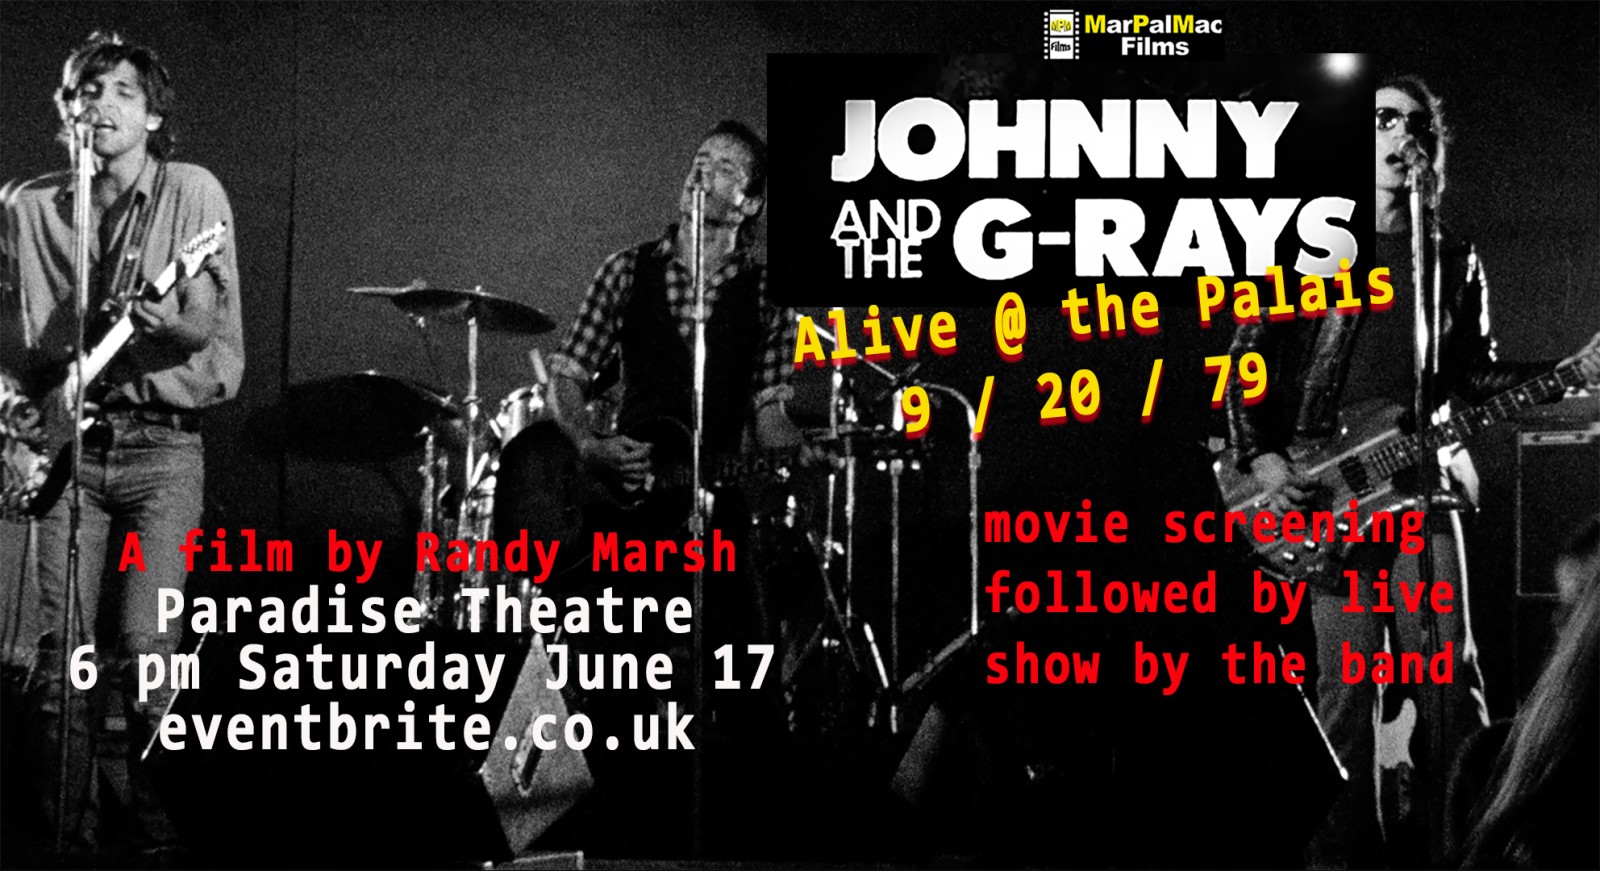 Johnny And The G-Rays Live At The Palais Royale film + live show with band